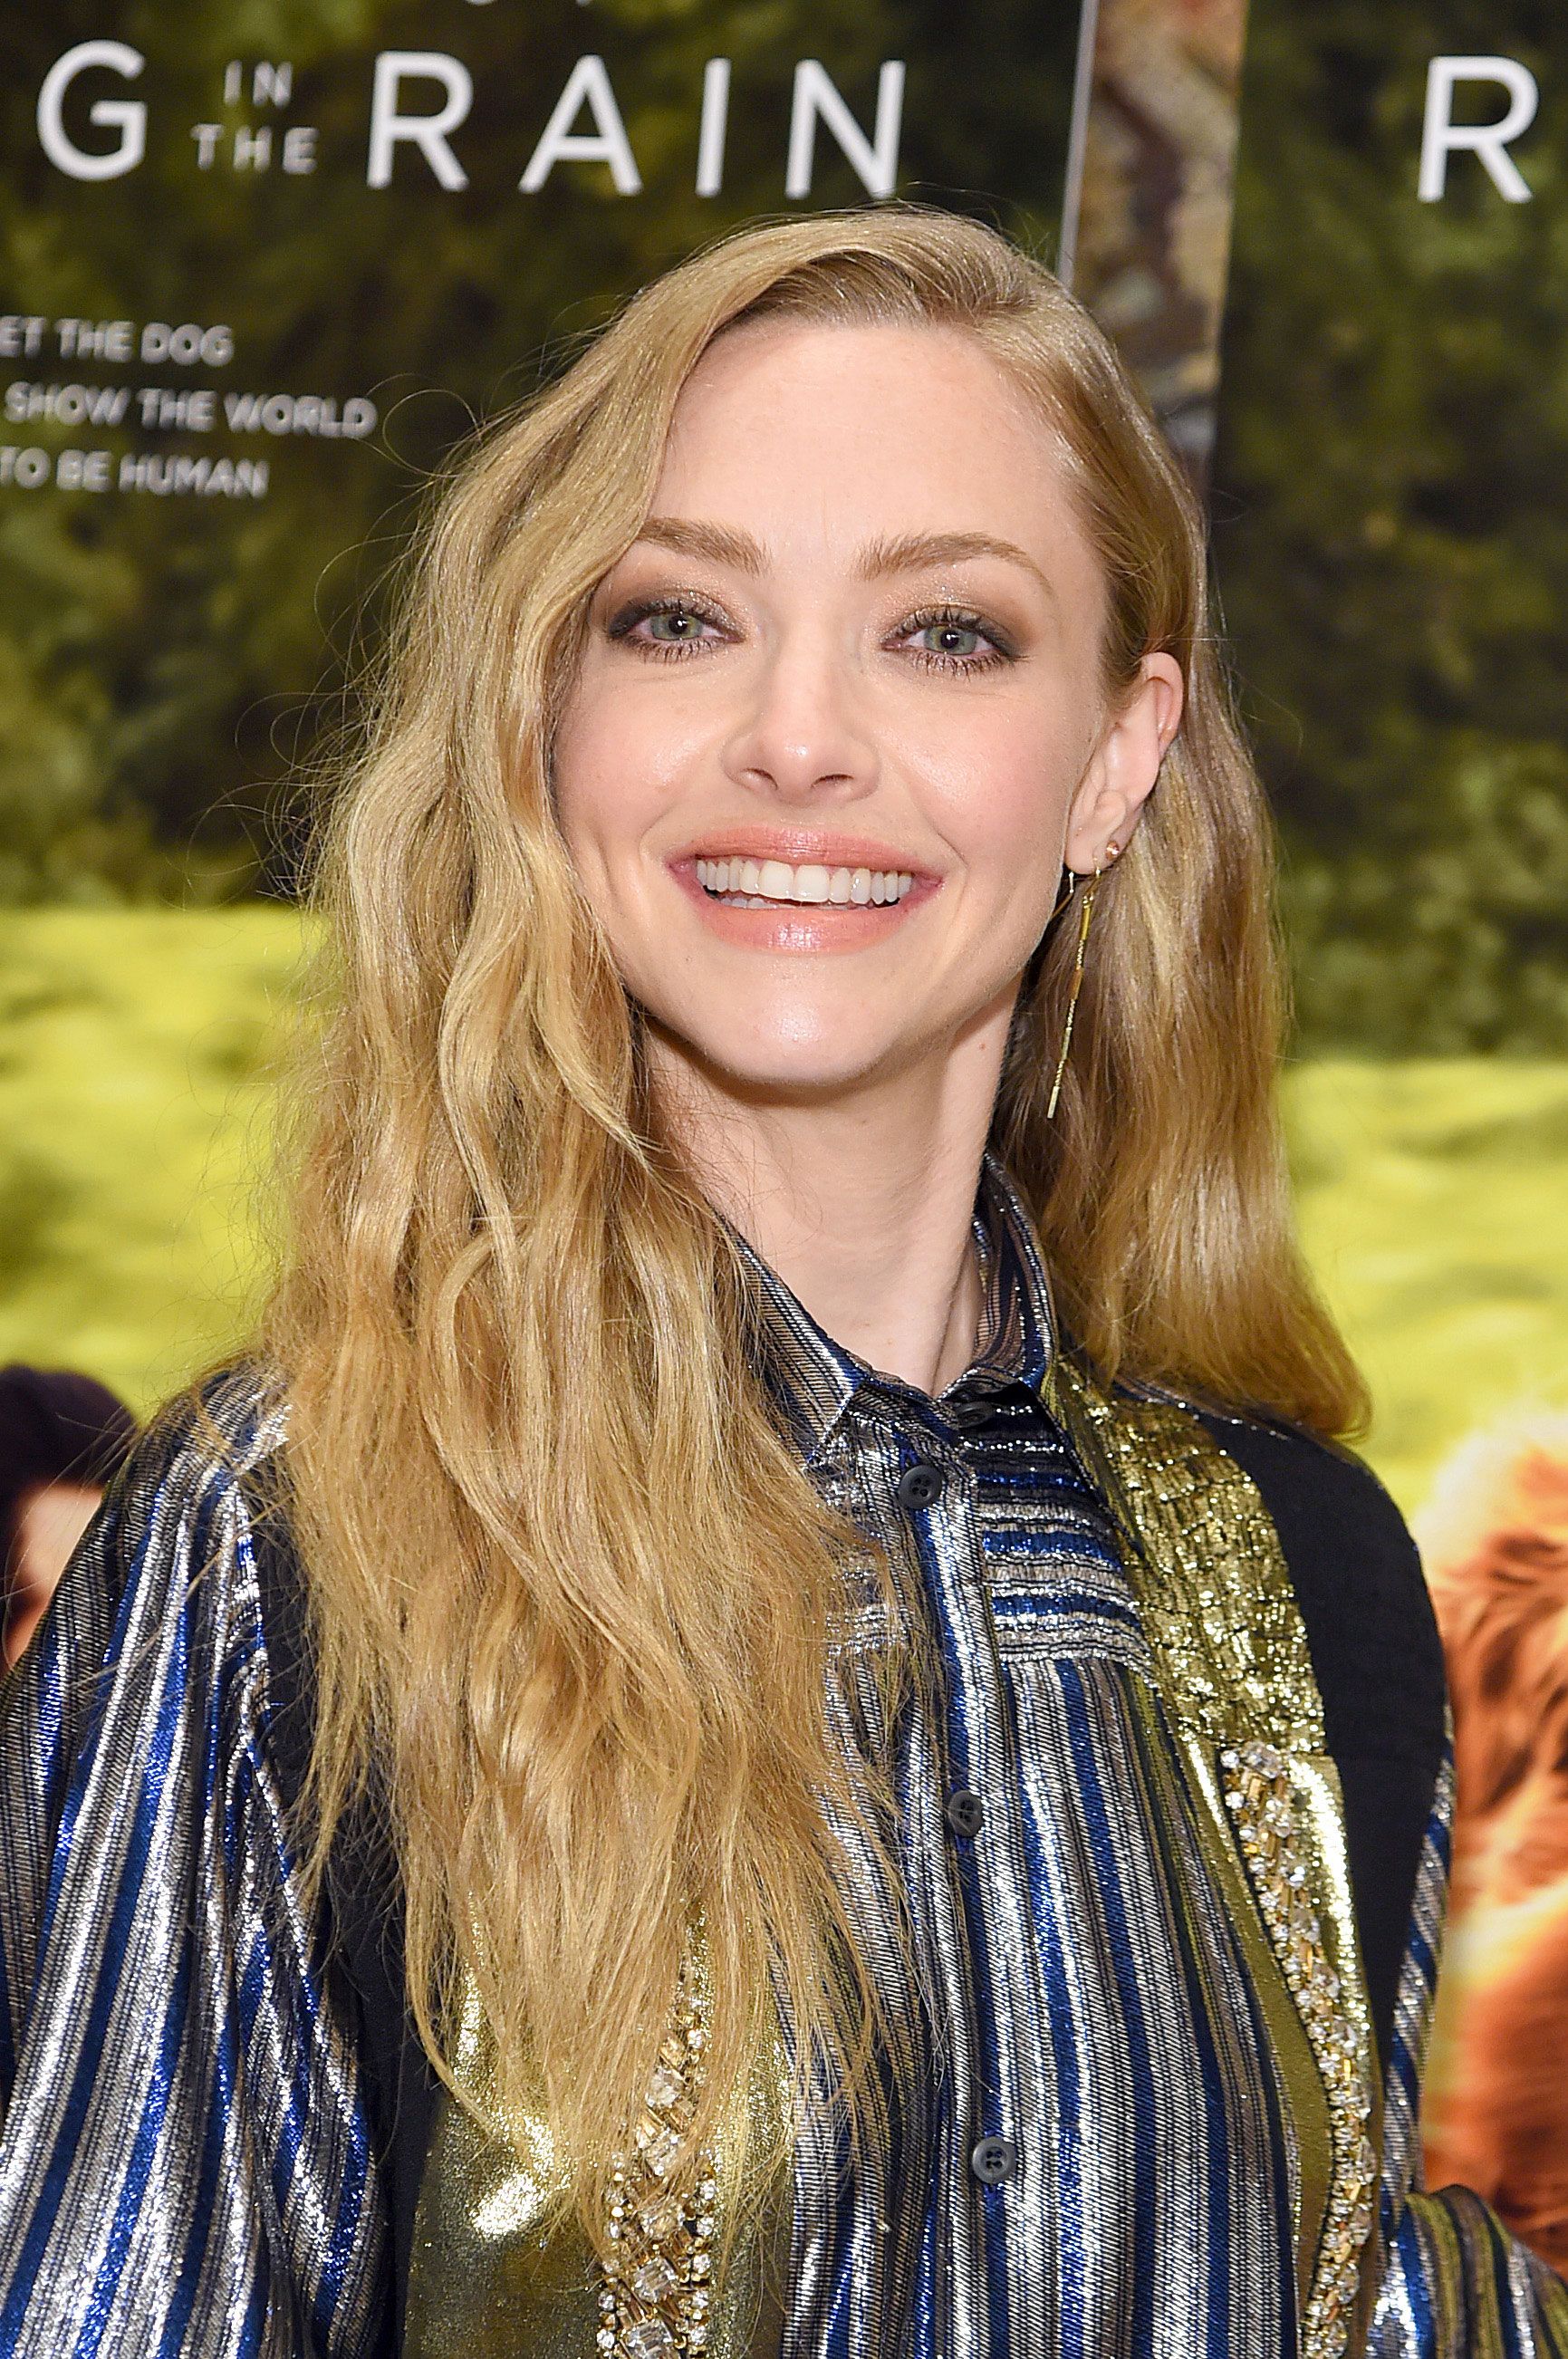 Amanda Seyfried's 1920s hair makeover is straight out of The Great Gatsby